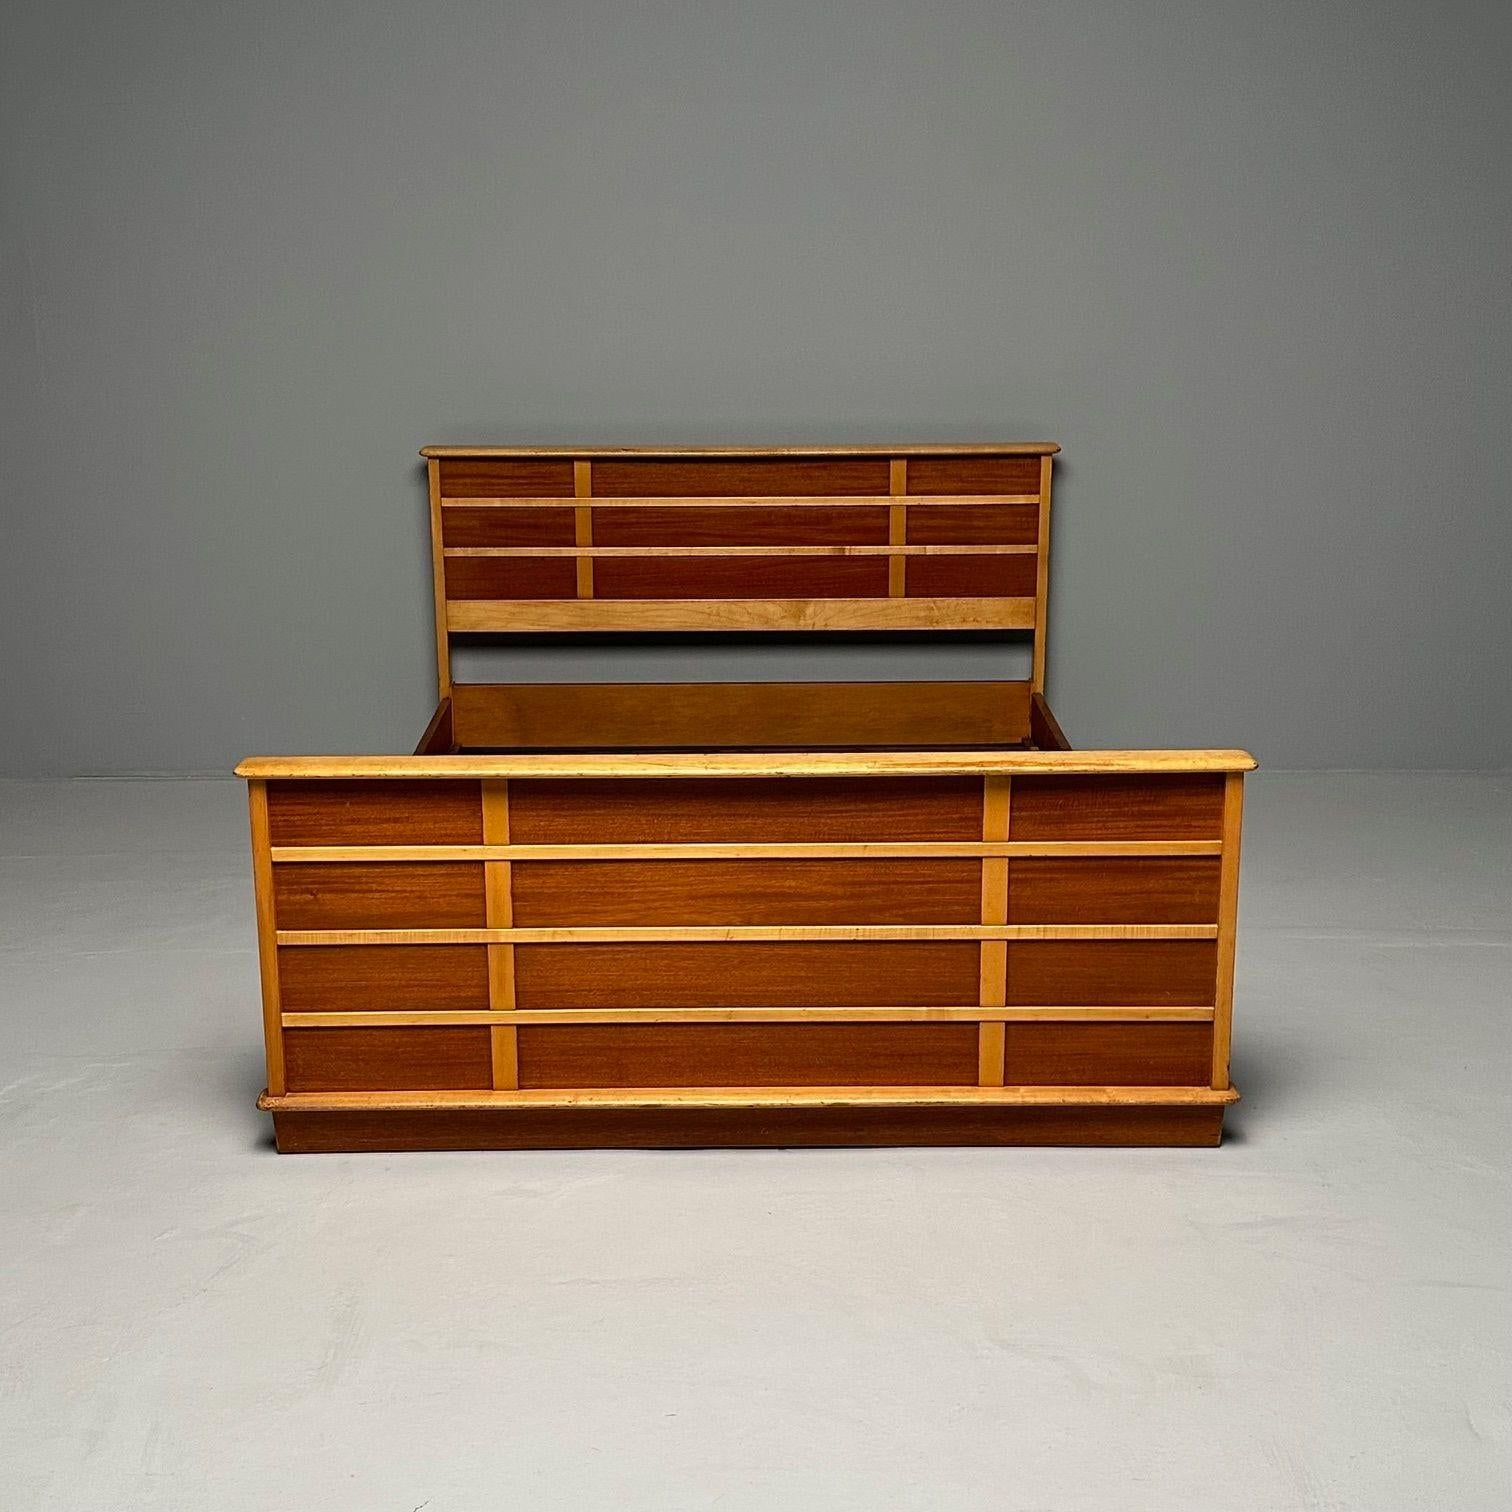 Mid-20th Century Paul Frankl, Johnson Furniture, Mid-Century Modern, Station Wagon Bedframe For Sale